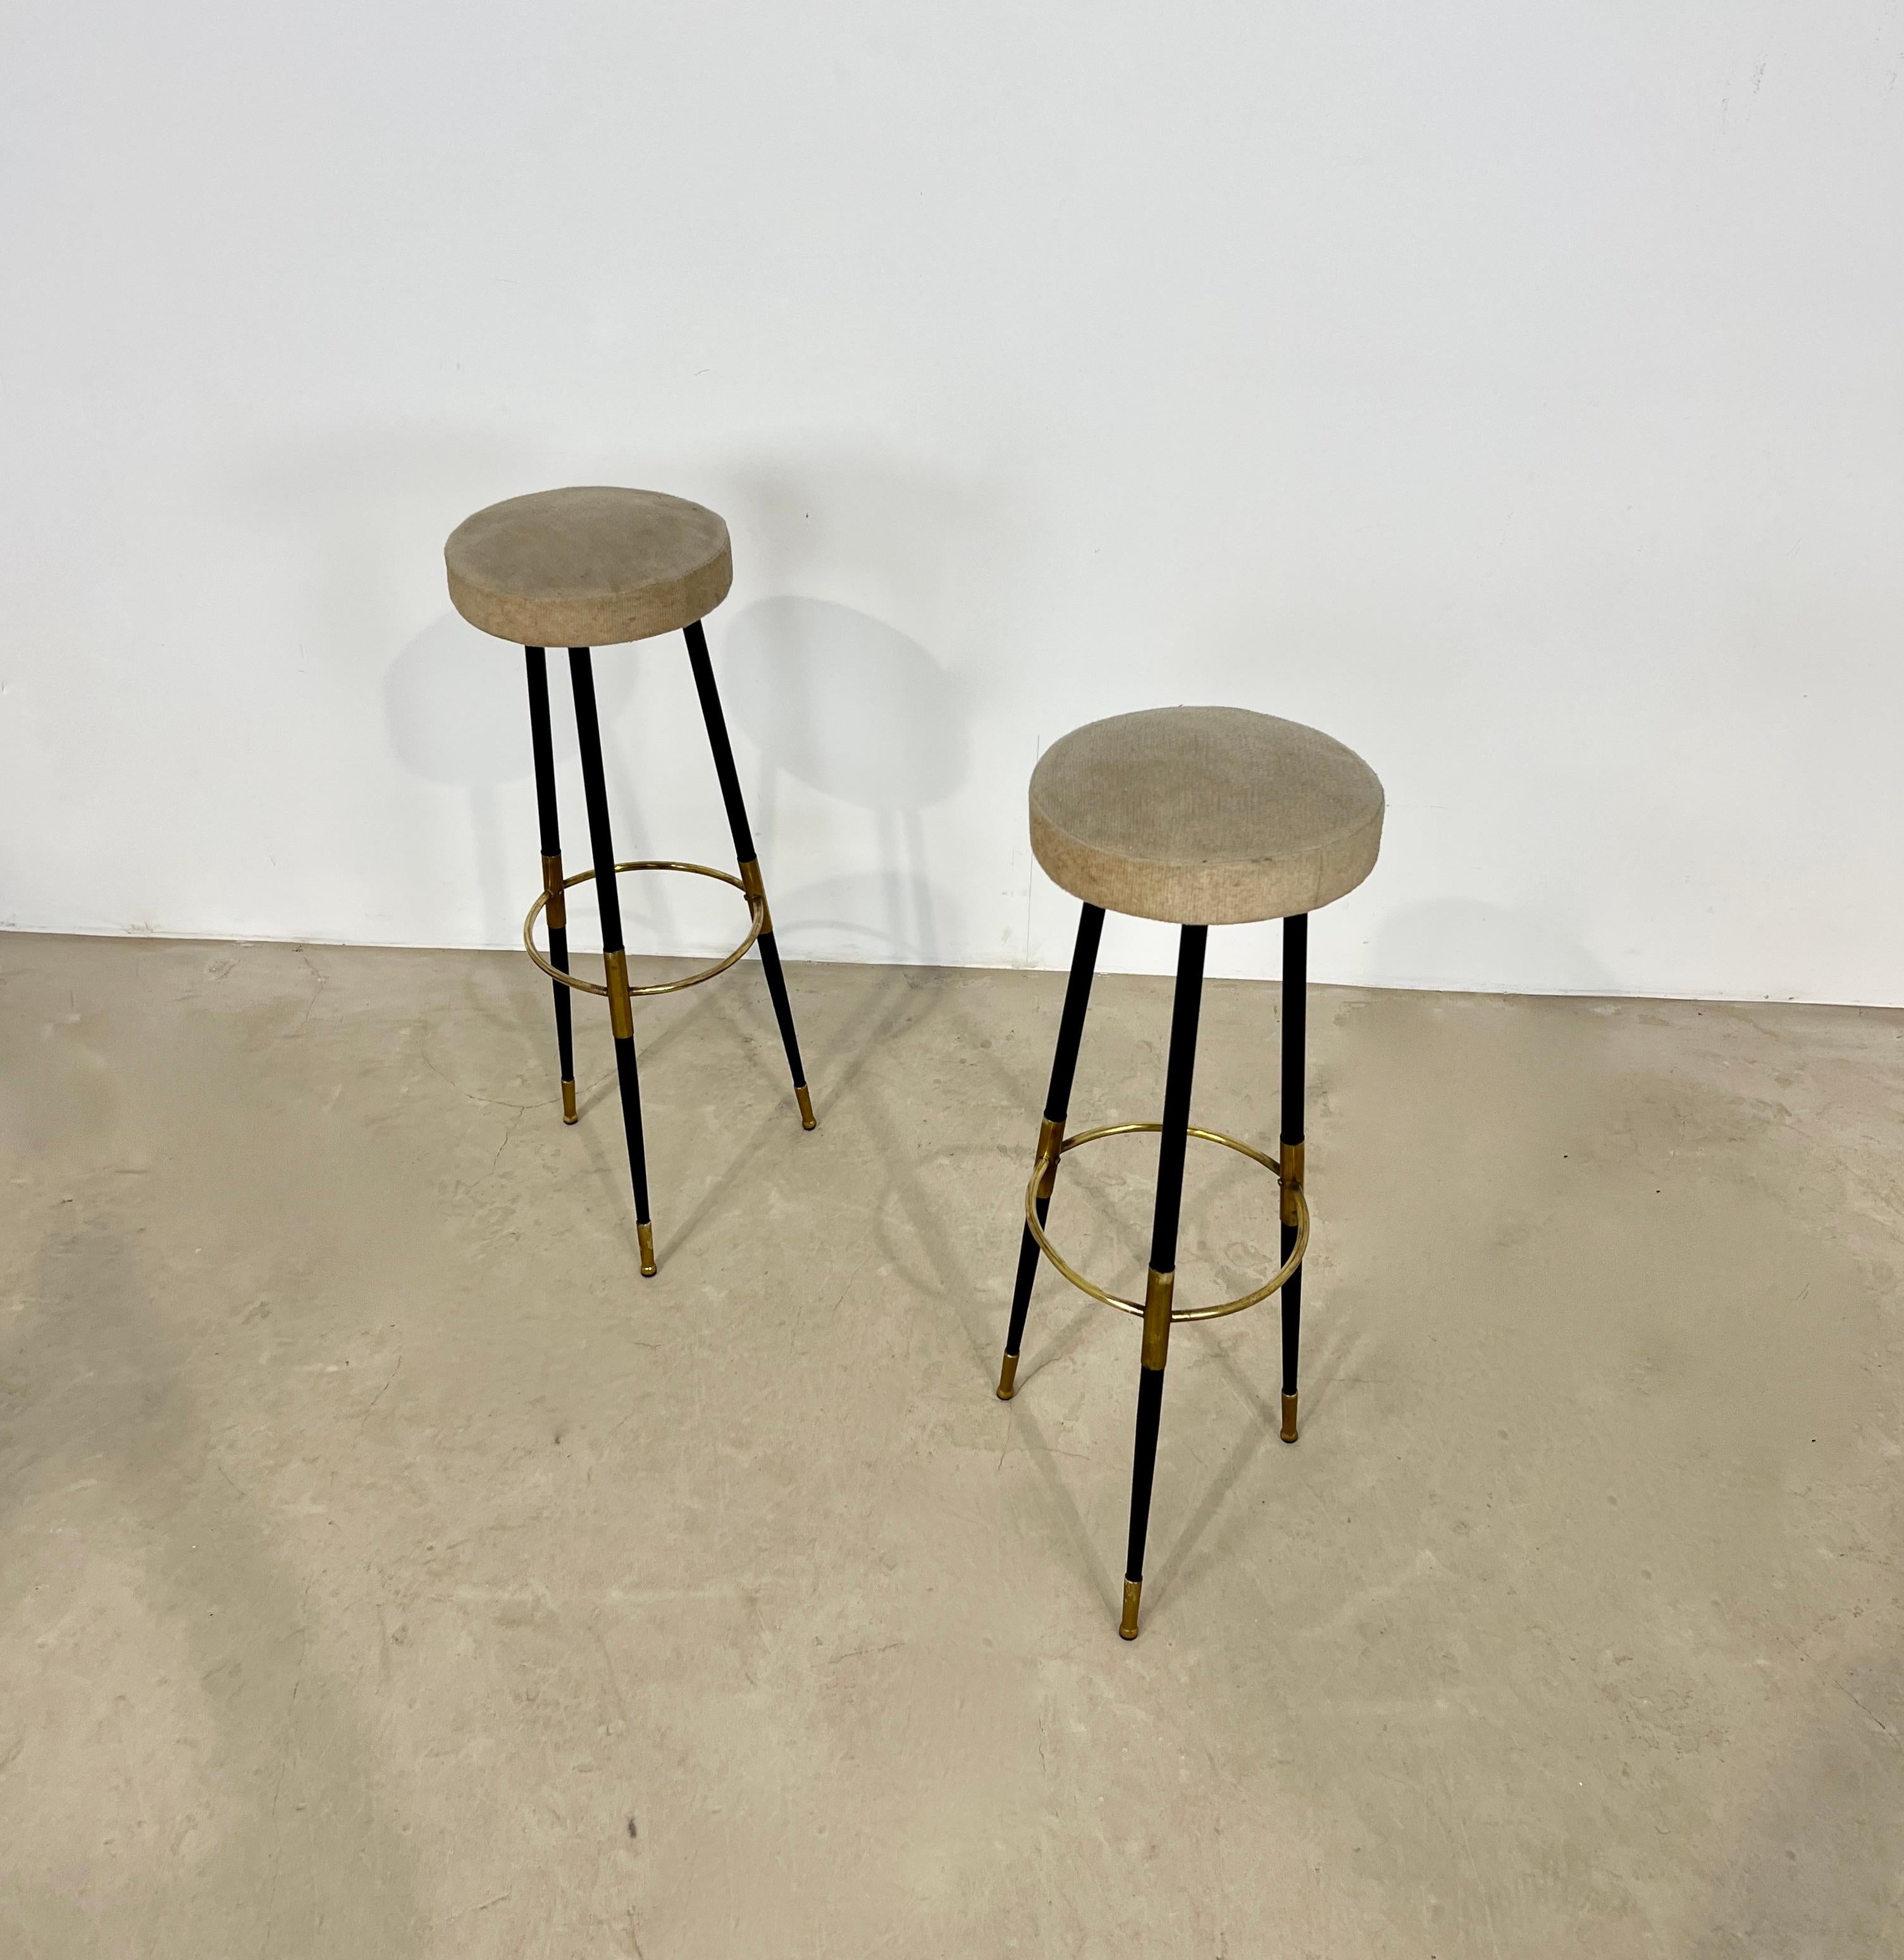 Pair of Italian stools in metal, brass and fabric. Wear due to time and age of the stools.